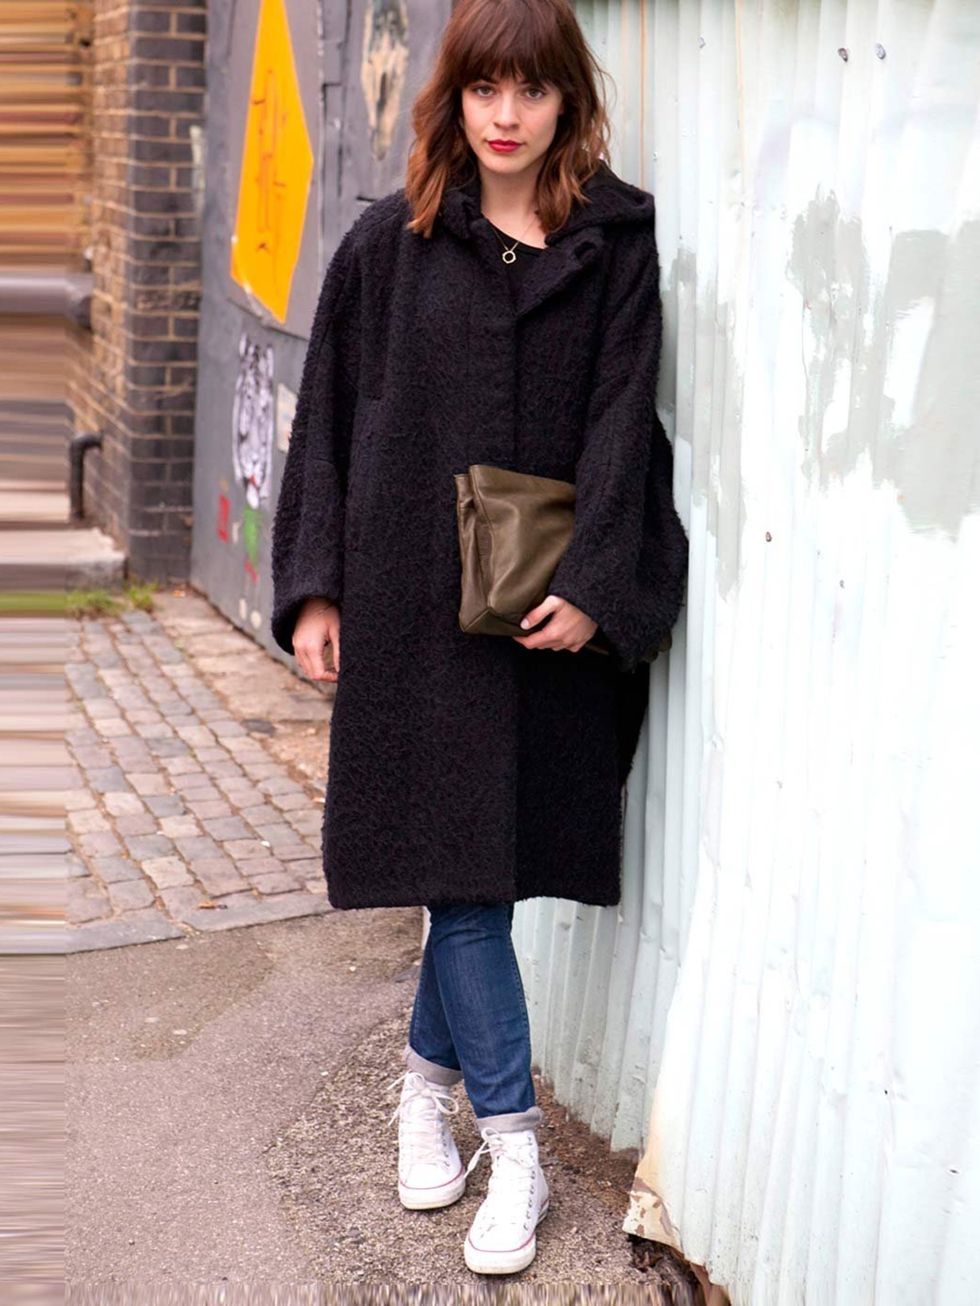 <p>Kate, 27, Assistant Buyer. Acne coat, Cos jeans and bag, Converse trainers.</p>